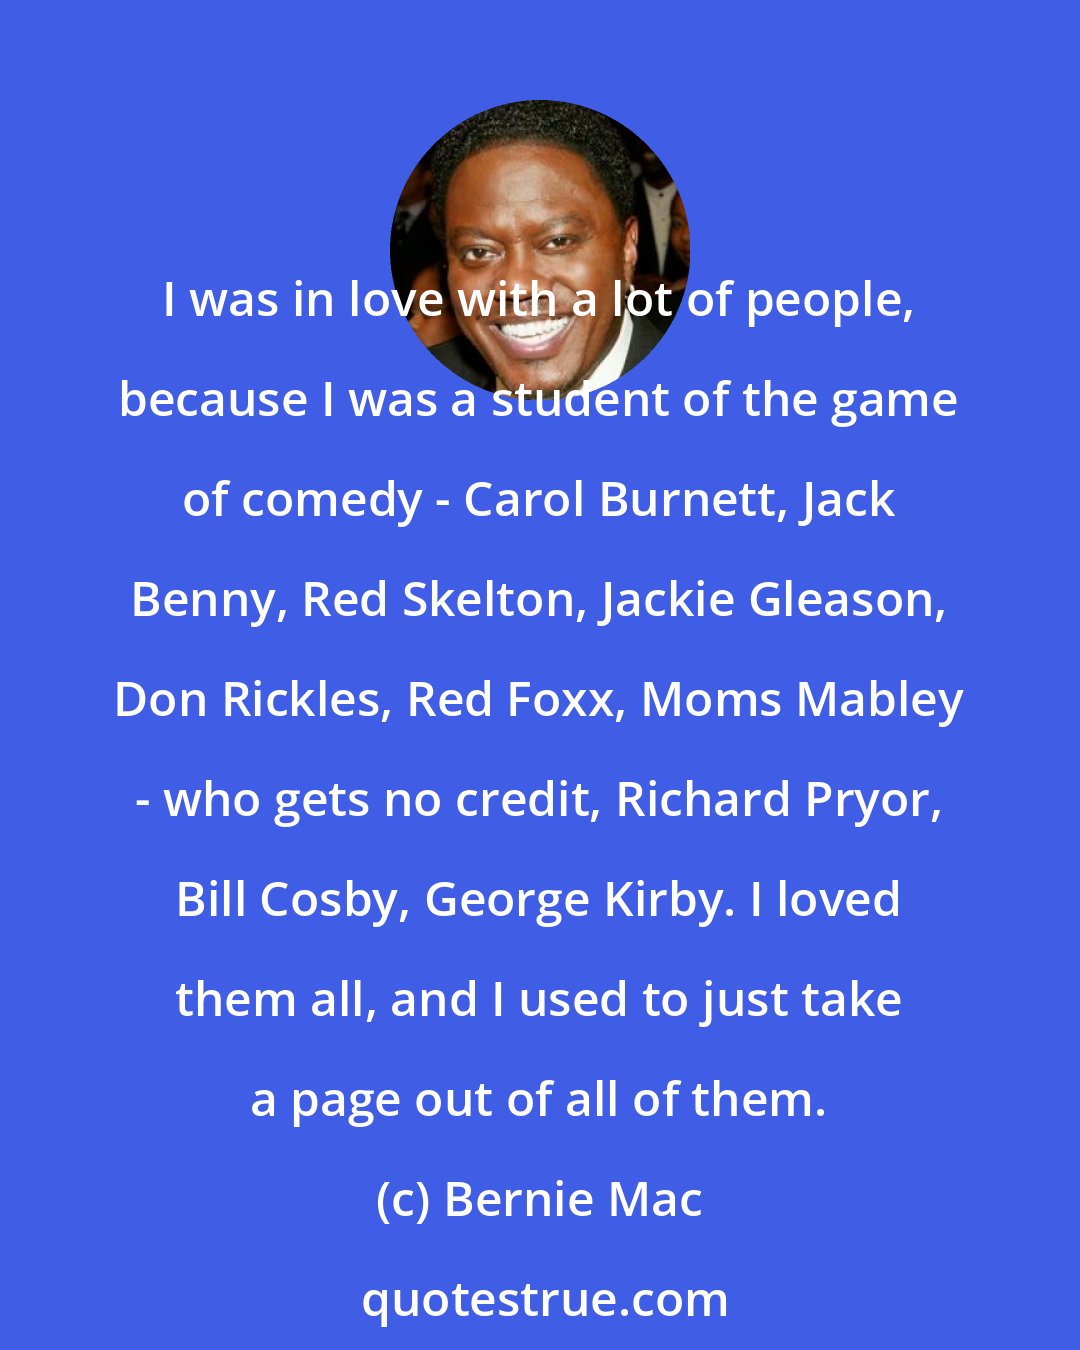 Bernie Mac: I was in love with a lot of people, because I was a student of the game of comedy - Carol Burnett, Jack Benny, Red Skelton, Jackie Gleason, Don Rickles, Red Foxx, Moms Mabley - who gets no credit, Richard Pryor, Bill Cosby, George Kirby. I loved them all, and I used to just take a page out of all of them.